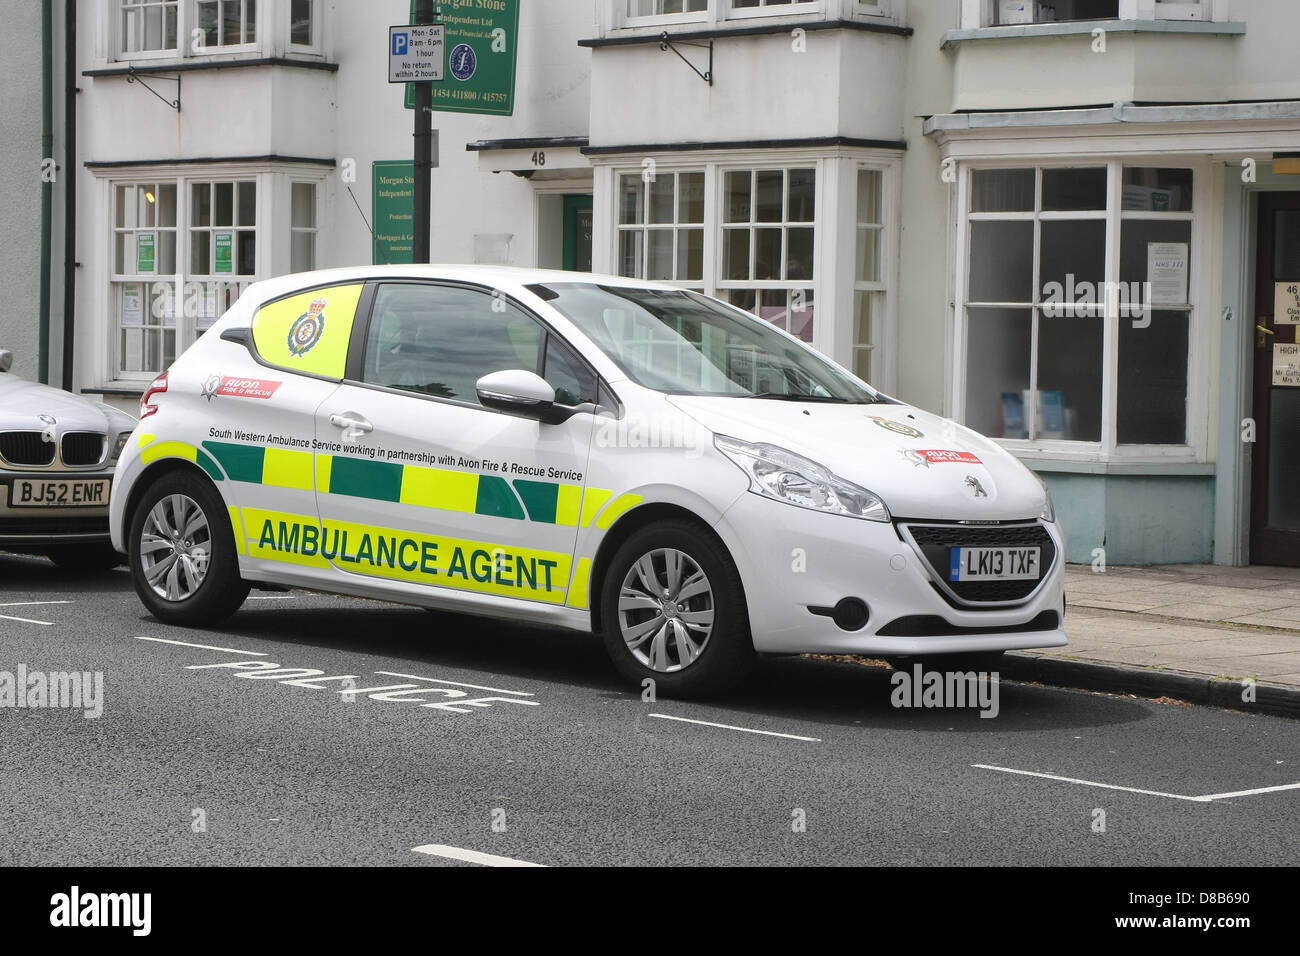 Ambulance agent car parked in a police parking space, used for coordination between Ambulance and fire services. May 2013 Stock Photo